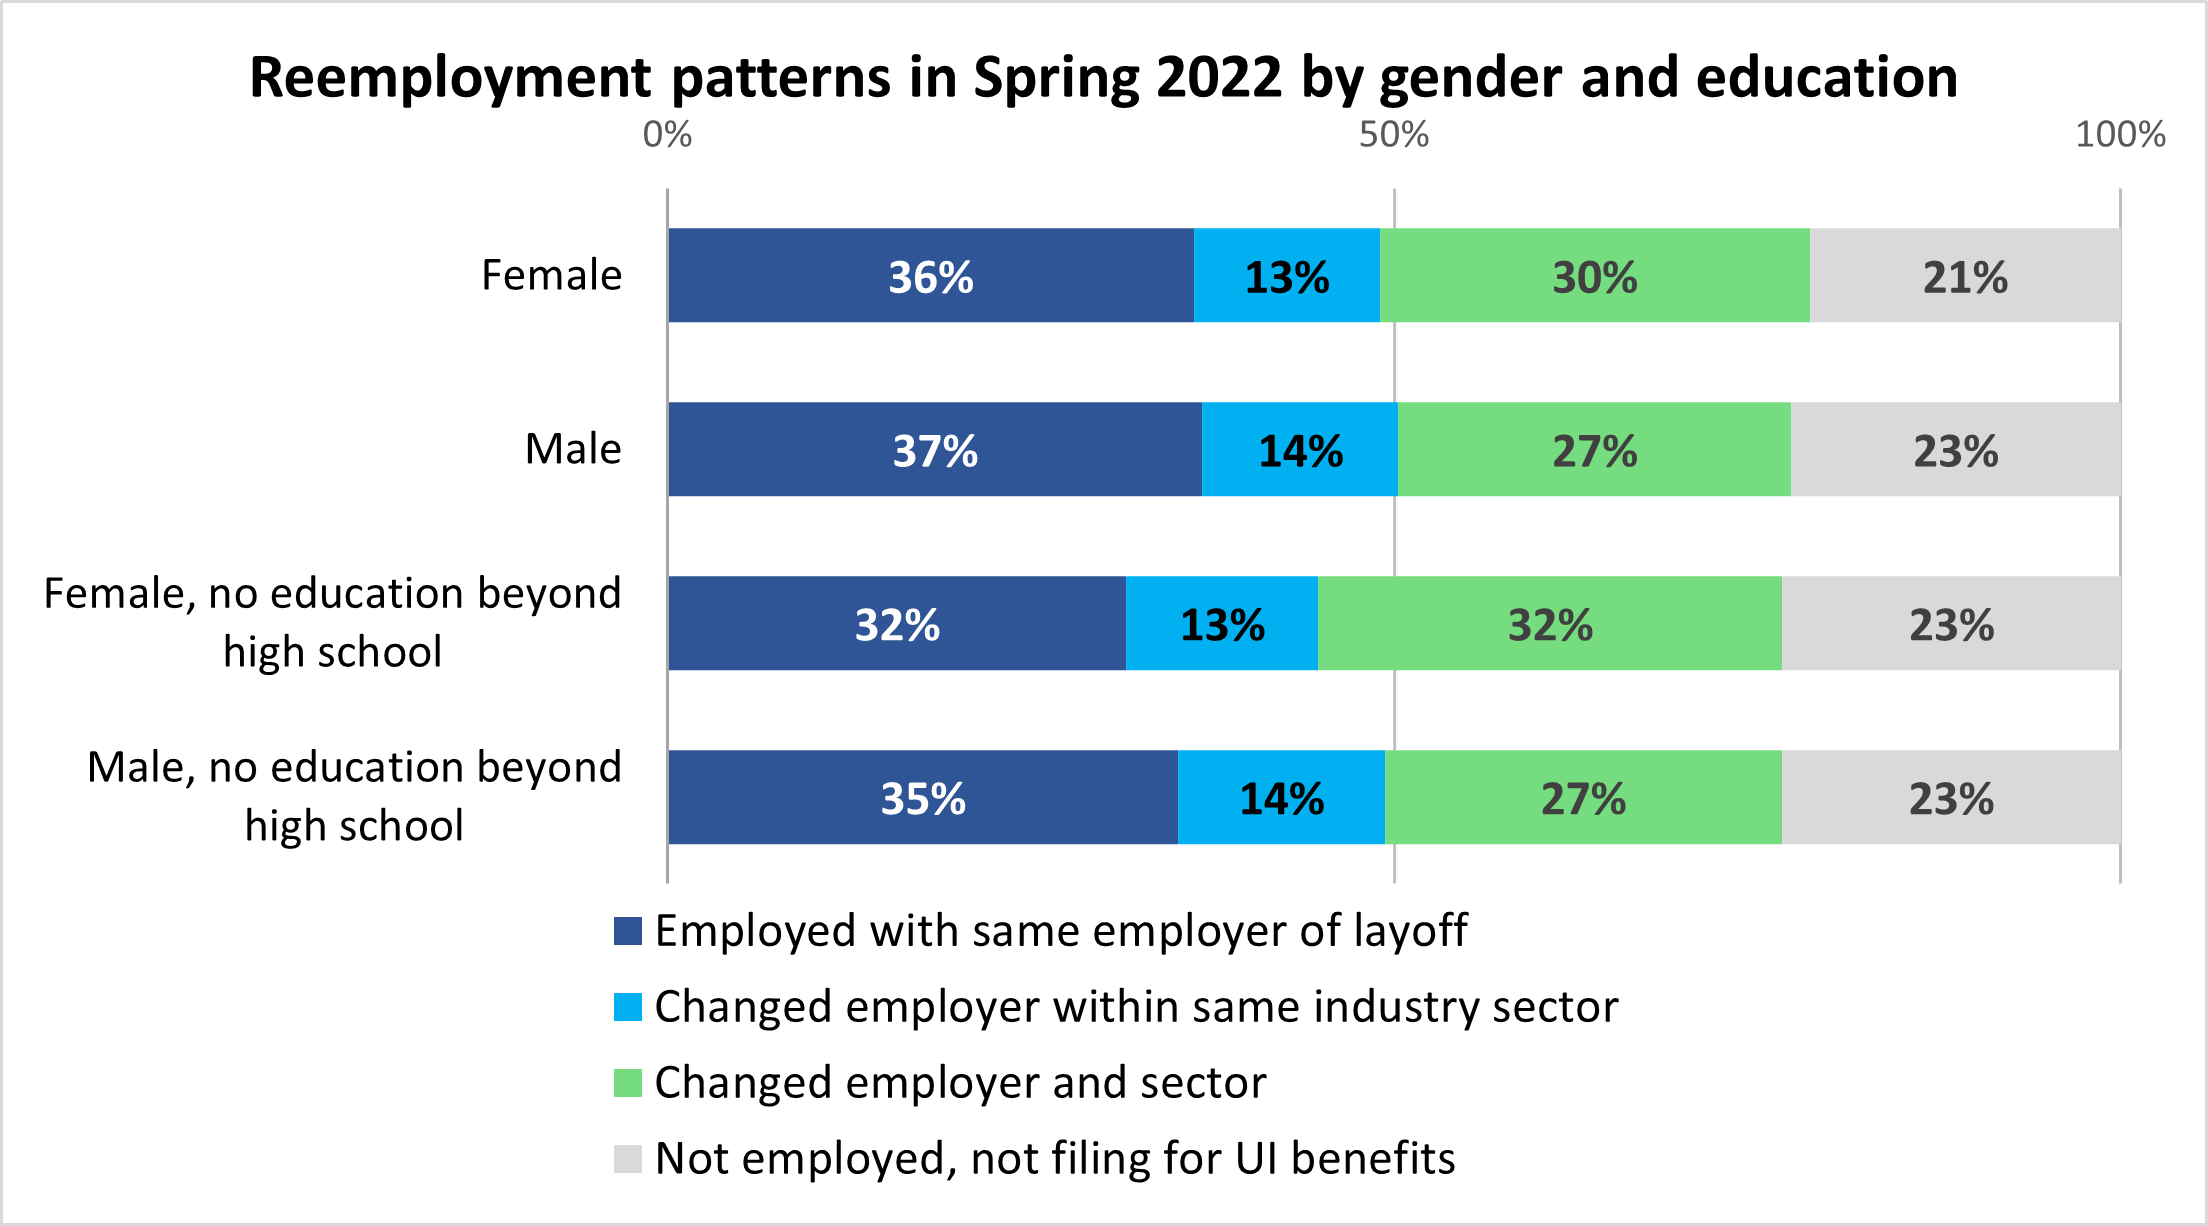 Reemployment patterns in Spring 2022 by gender and education